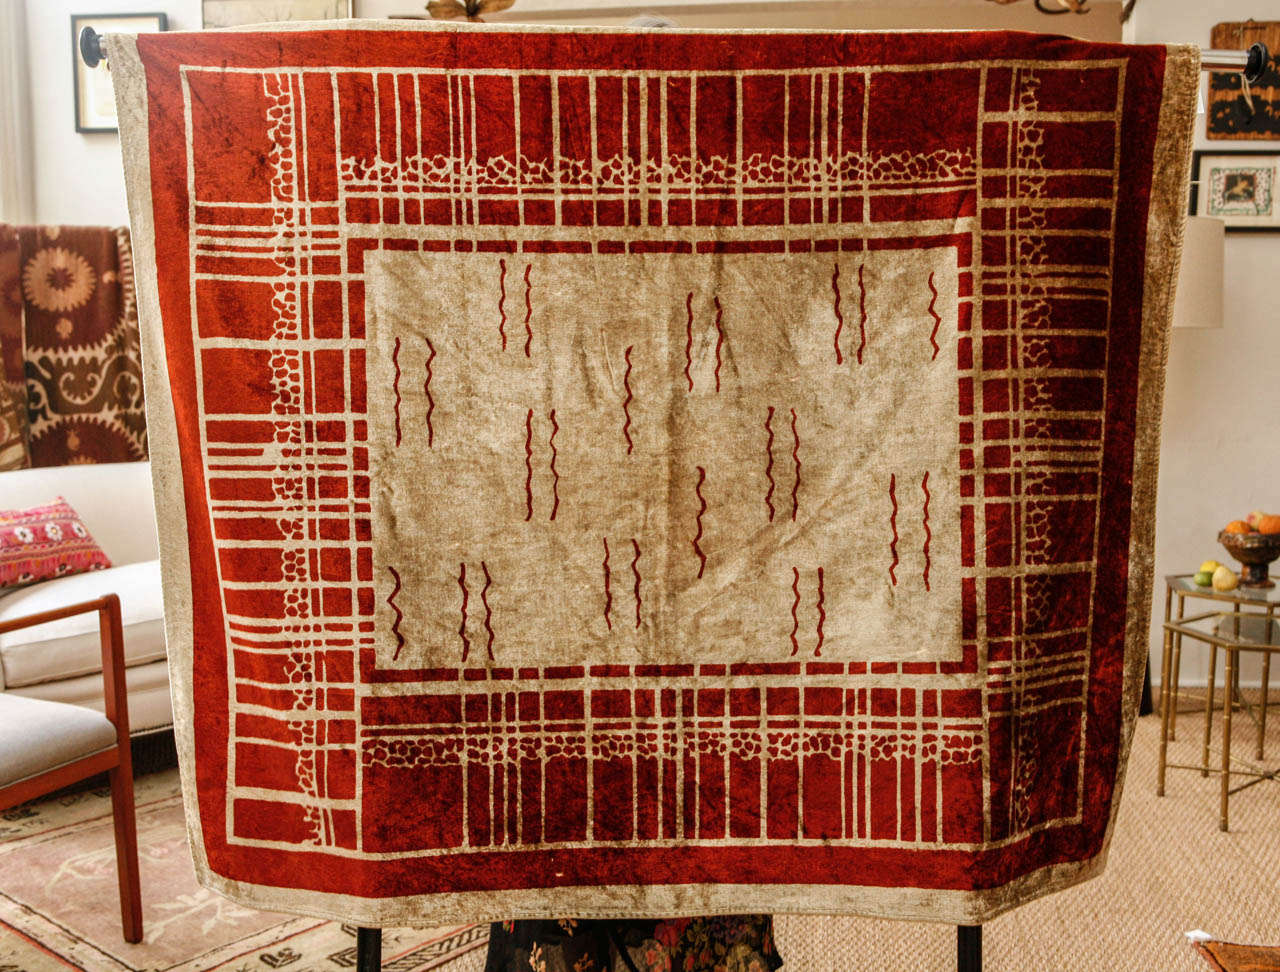 Silk velvet throw with art deco design in creme with red details and red border.